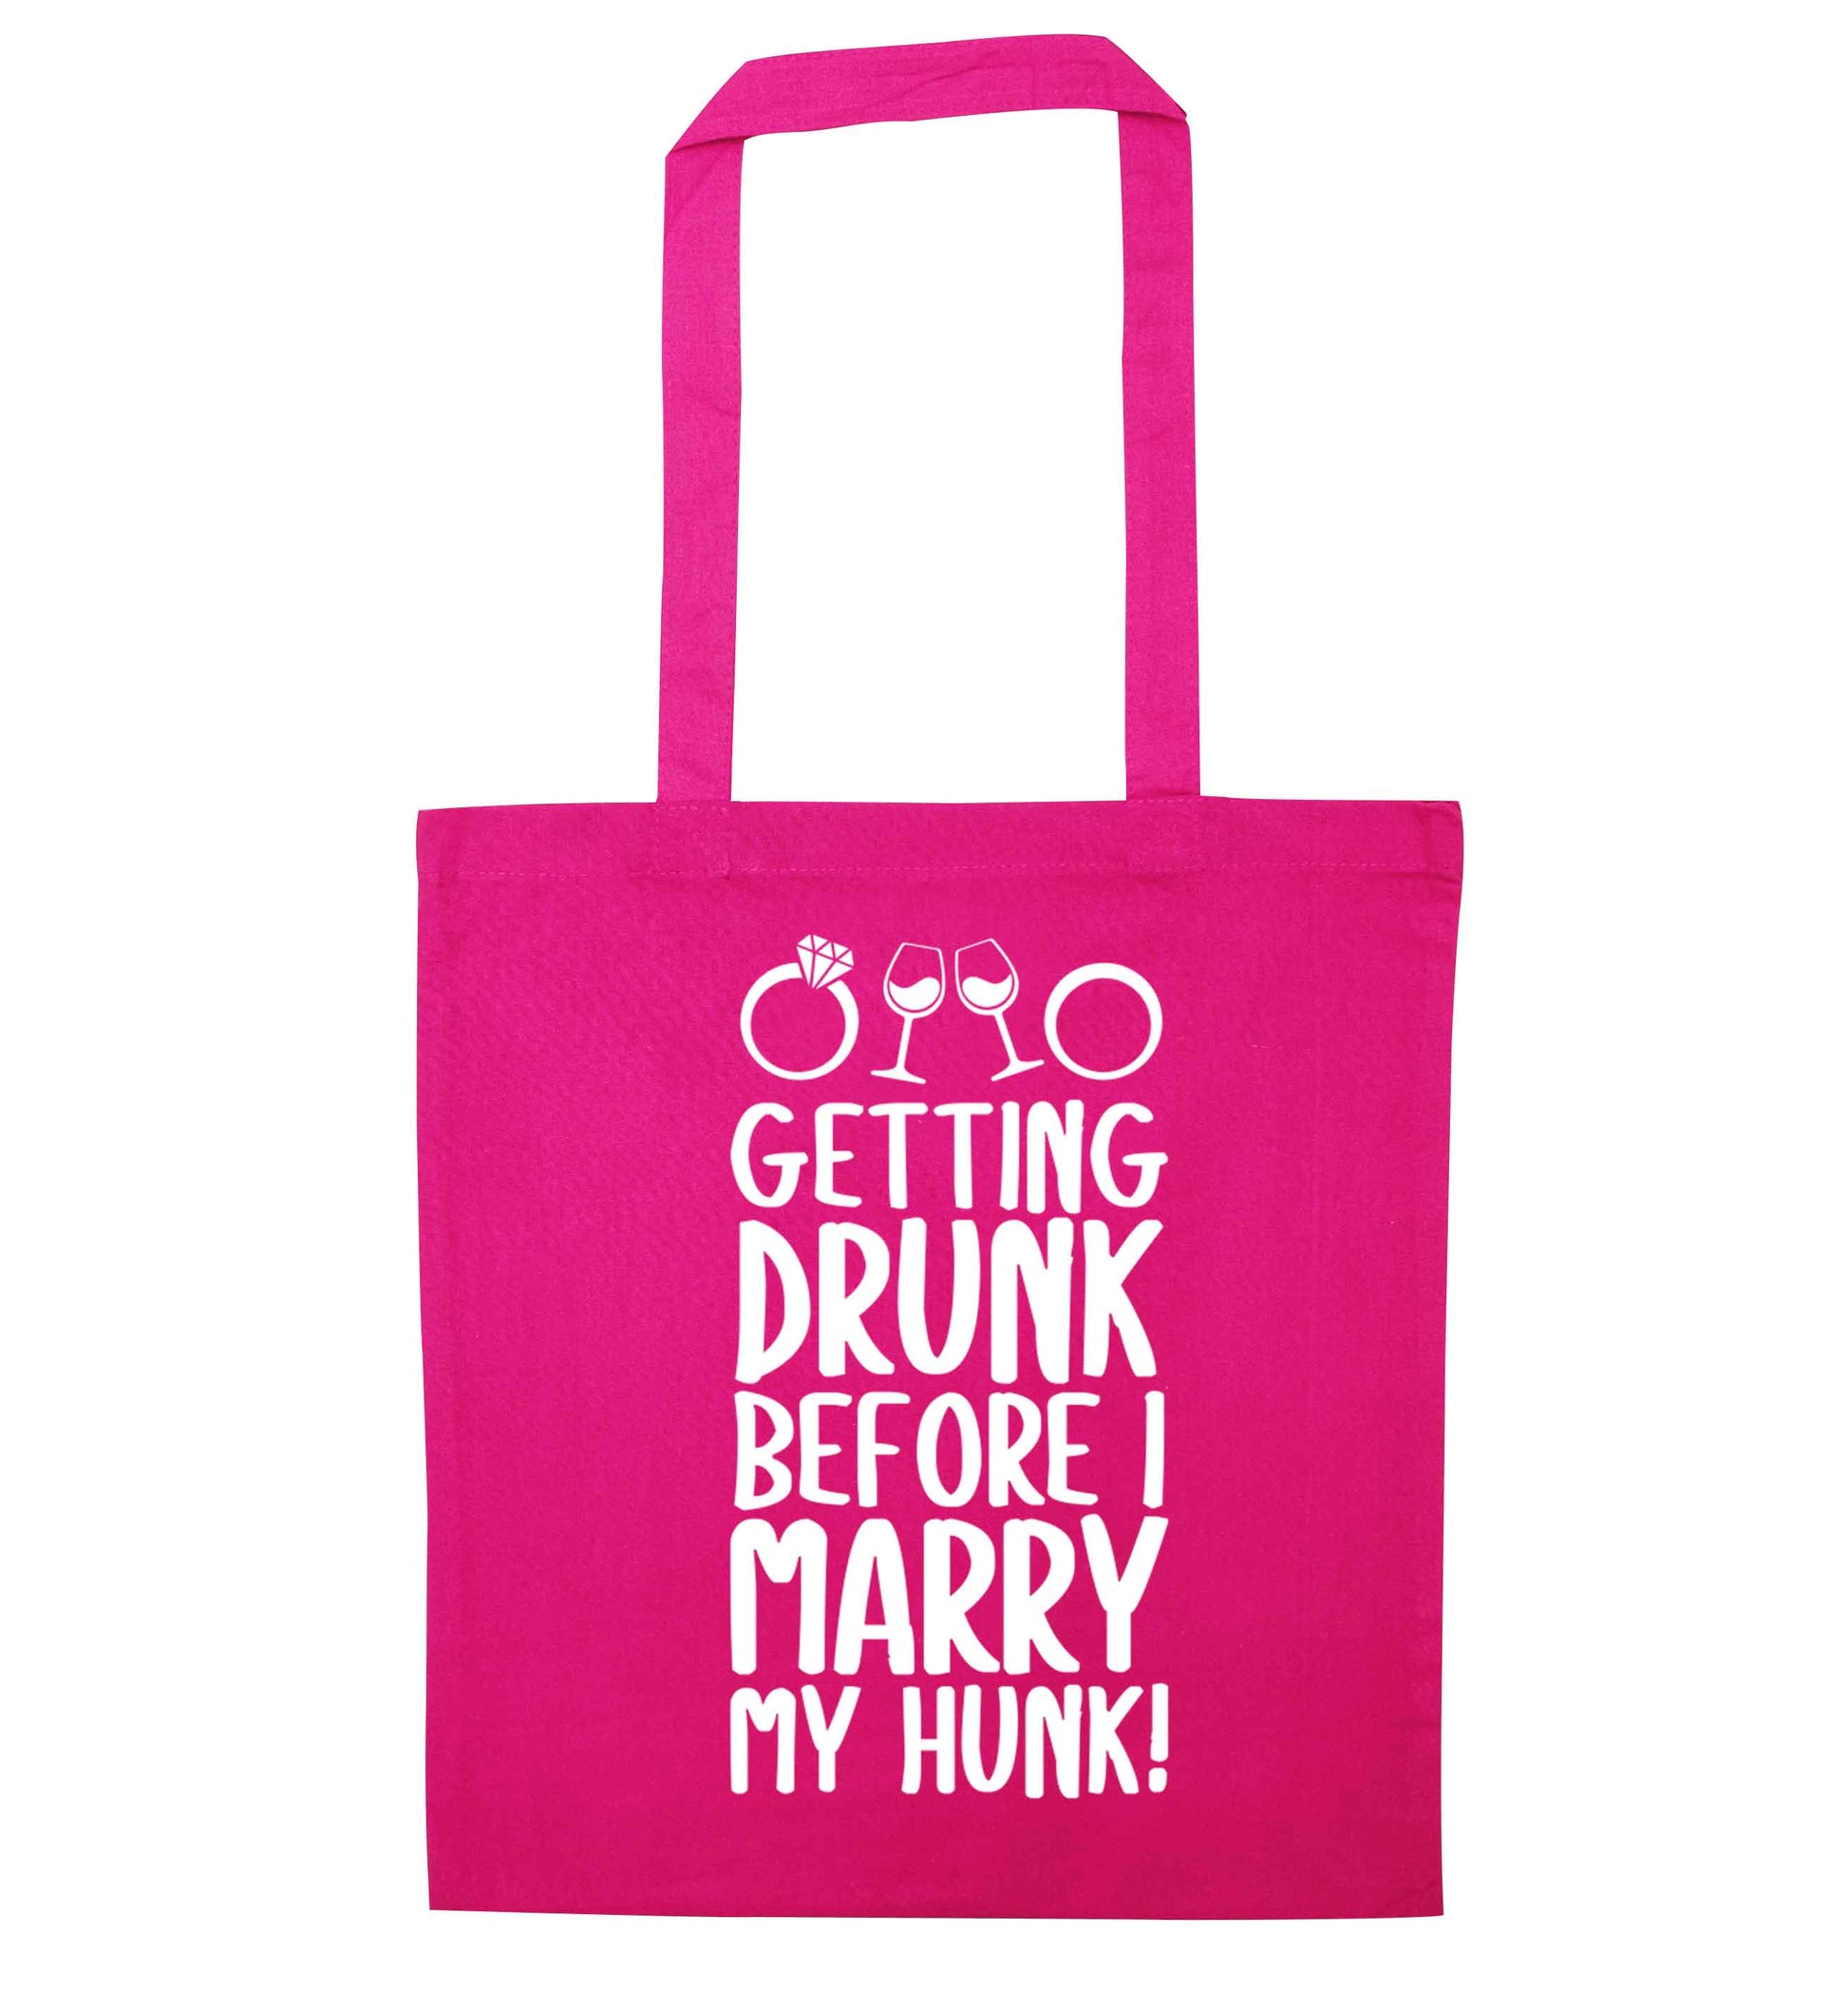 Getting drunk before I marry my hunk pink tote bag